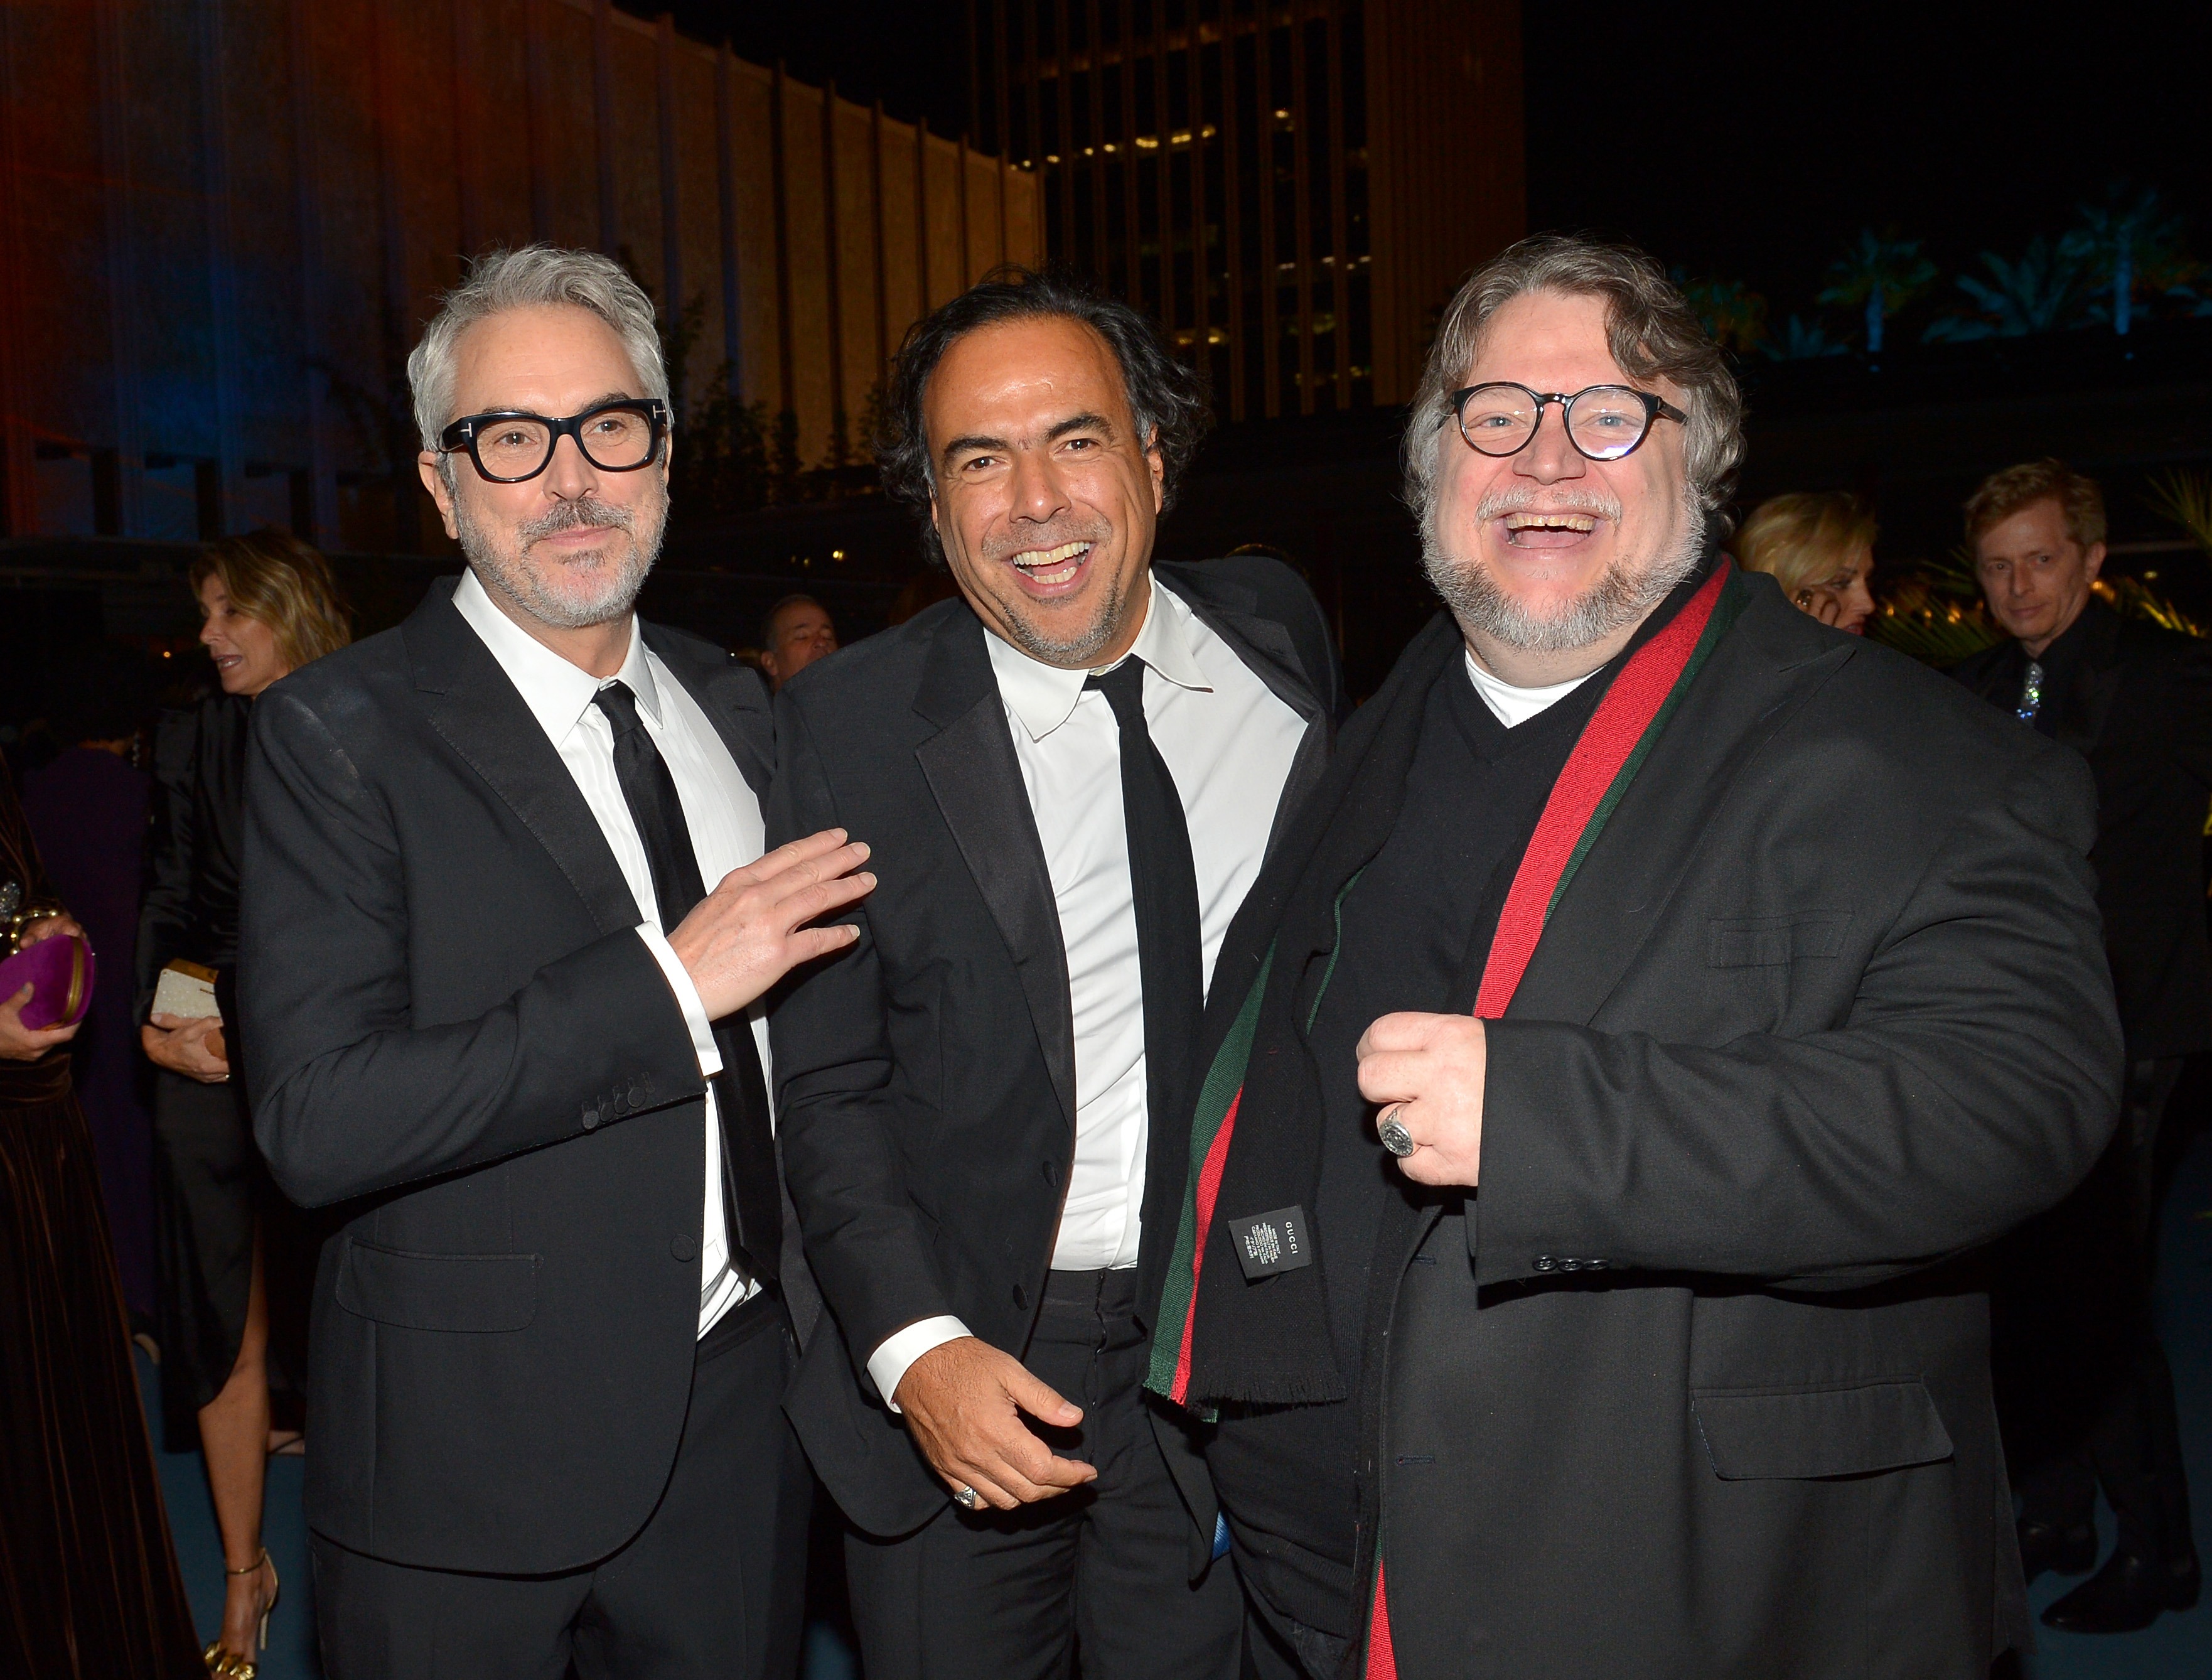 Honoree Alfonso Cuarón, Alejandro González Iñárritu, and Guillermo del Toro, photo by Donato Sardella/Getty Images for LACMA